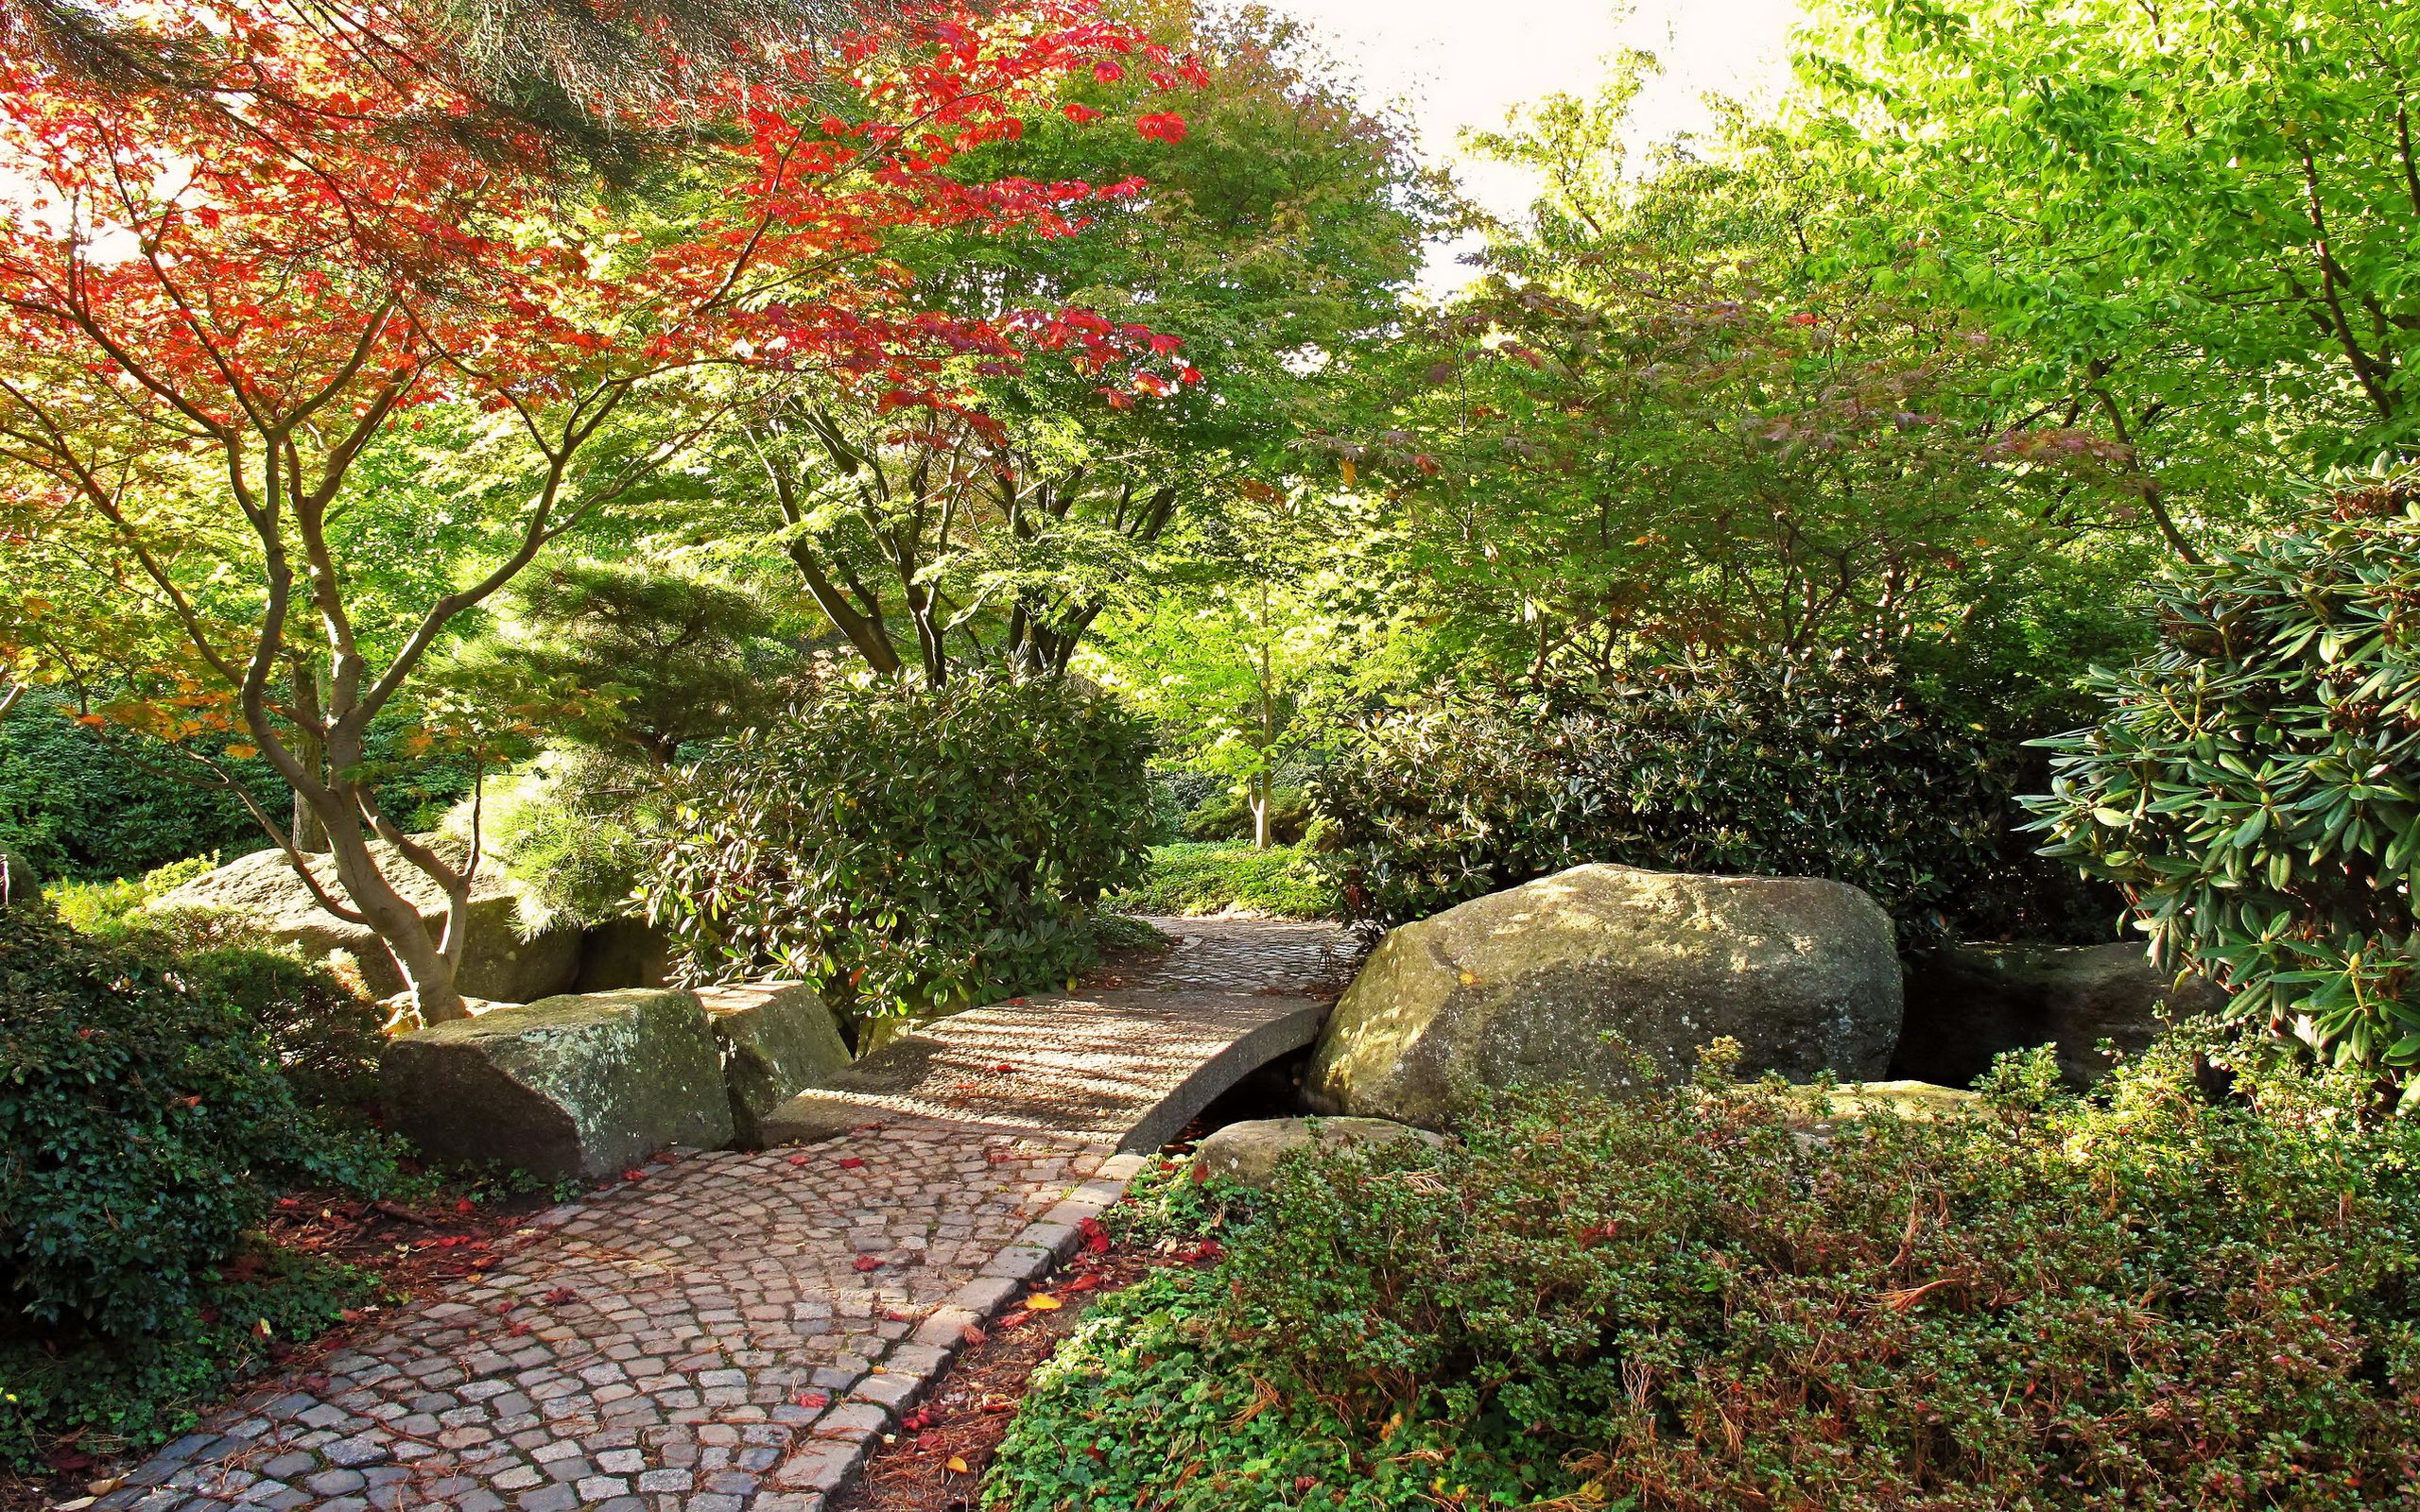 A stone path leads through a garden with trees and rocks. - Botanical